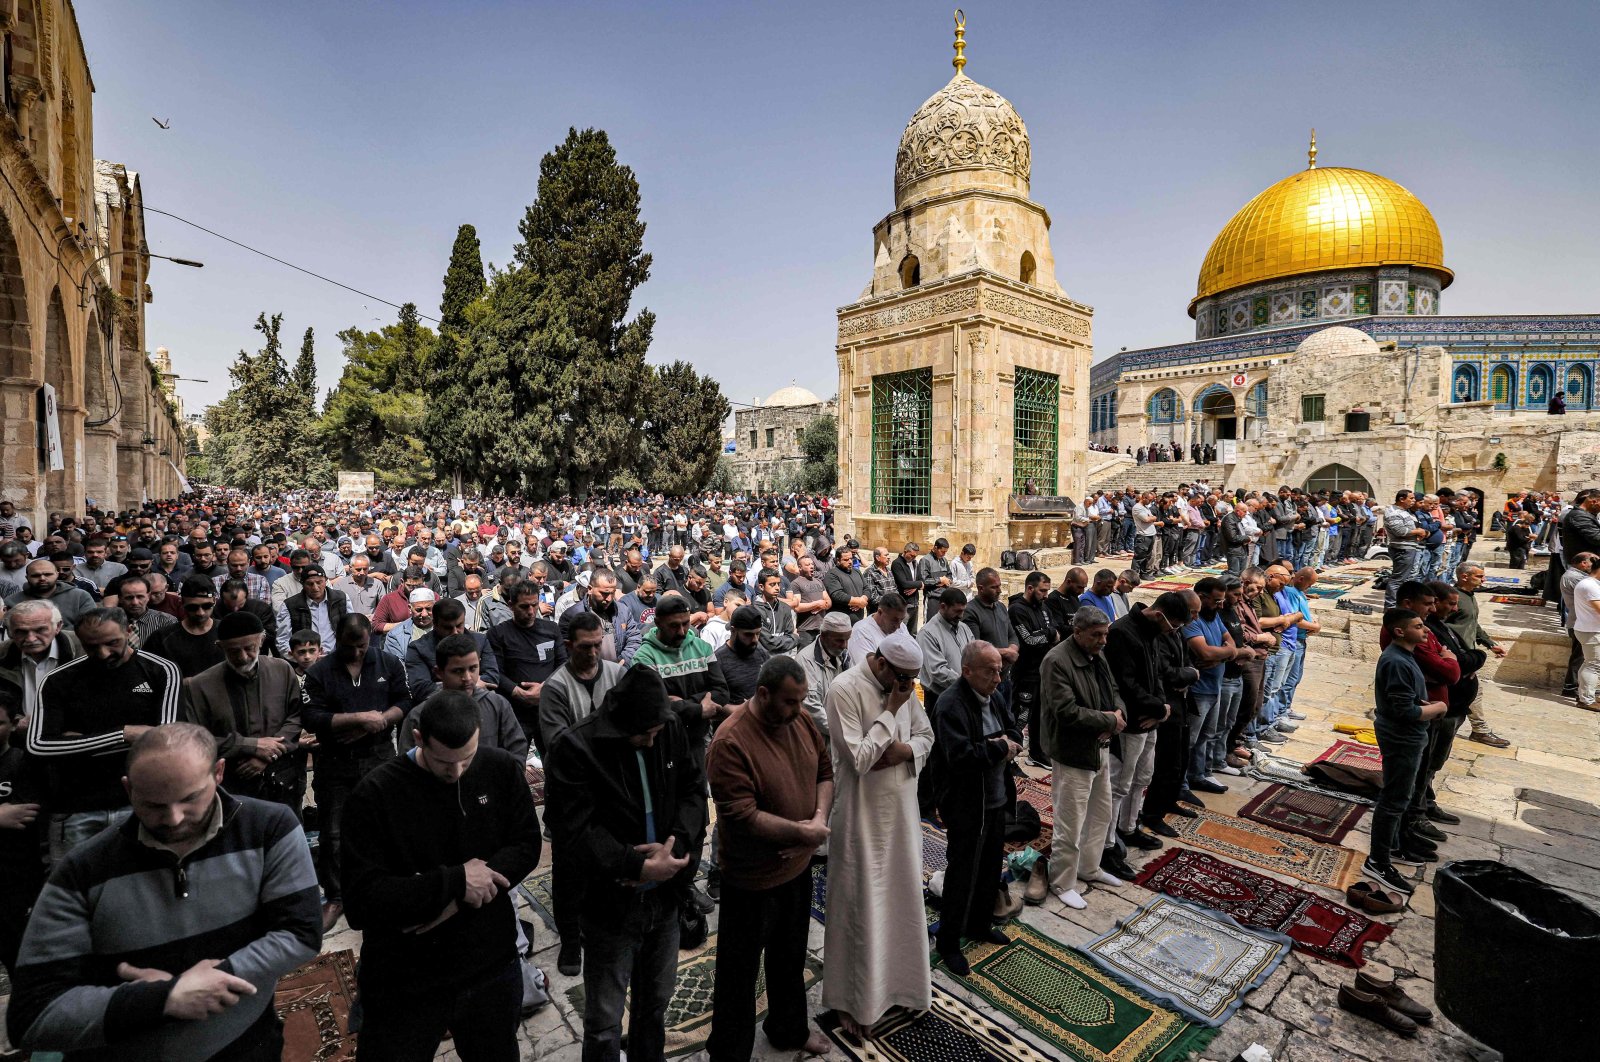 Muslim worshippers pray outside the Dome of the Rock shrine at Al-Aqsa Mosque compound in the Old City of Jerusalem on April 7, 2023, on the third Friday Noon prayer during the Muslim holy fasting month of Ramadan. (AFP Photo)